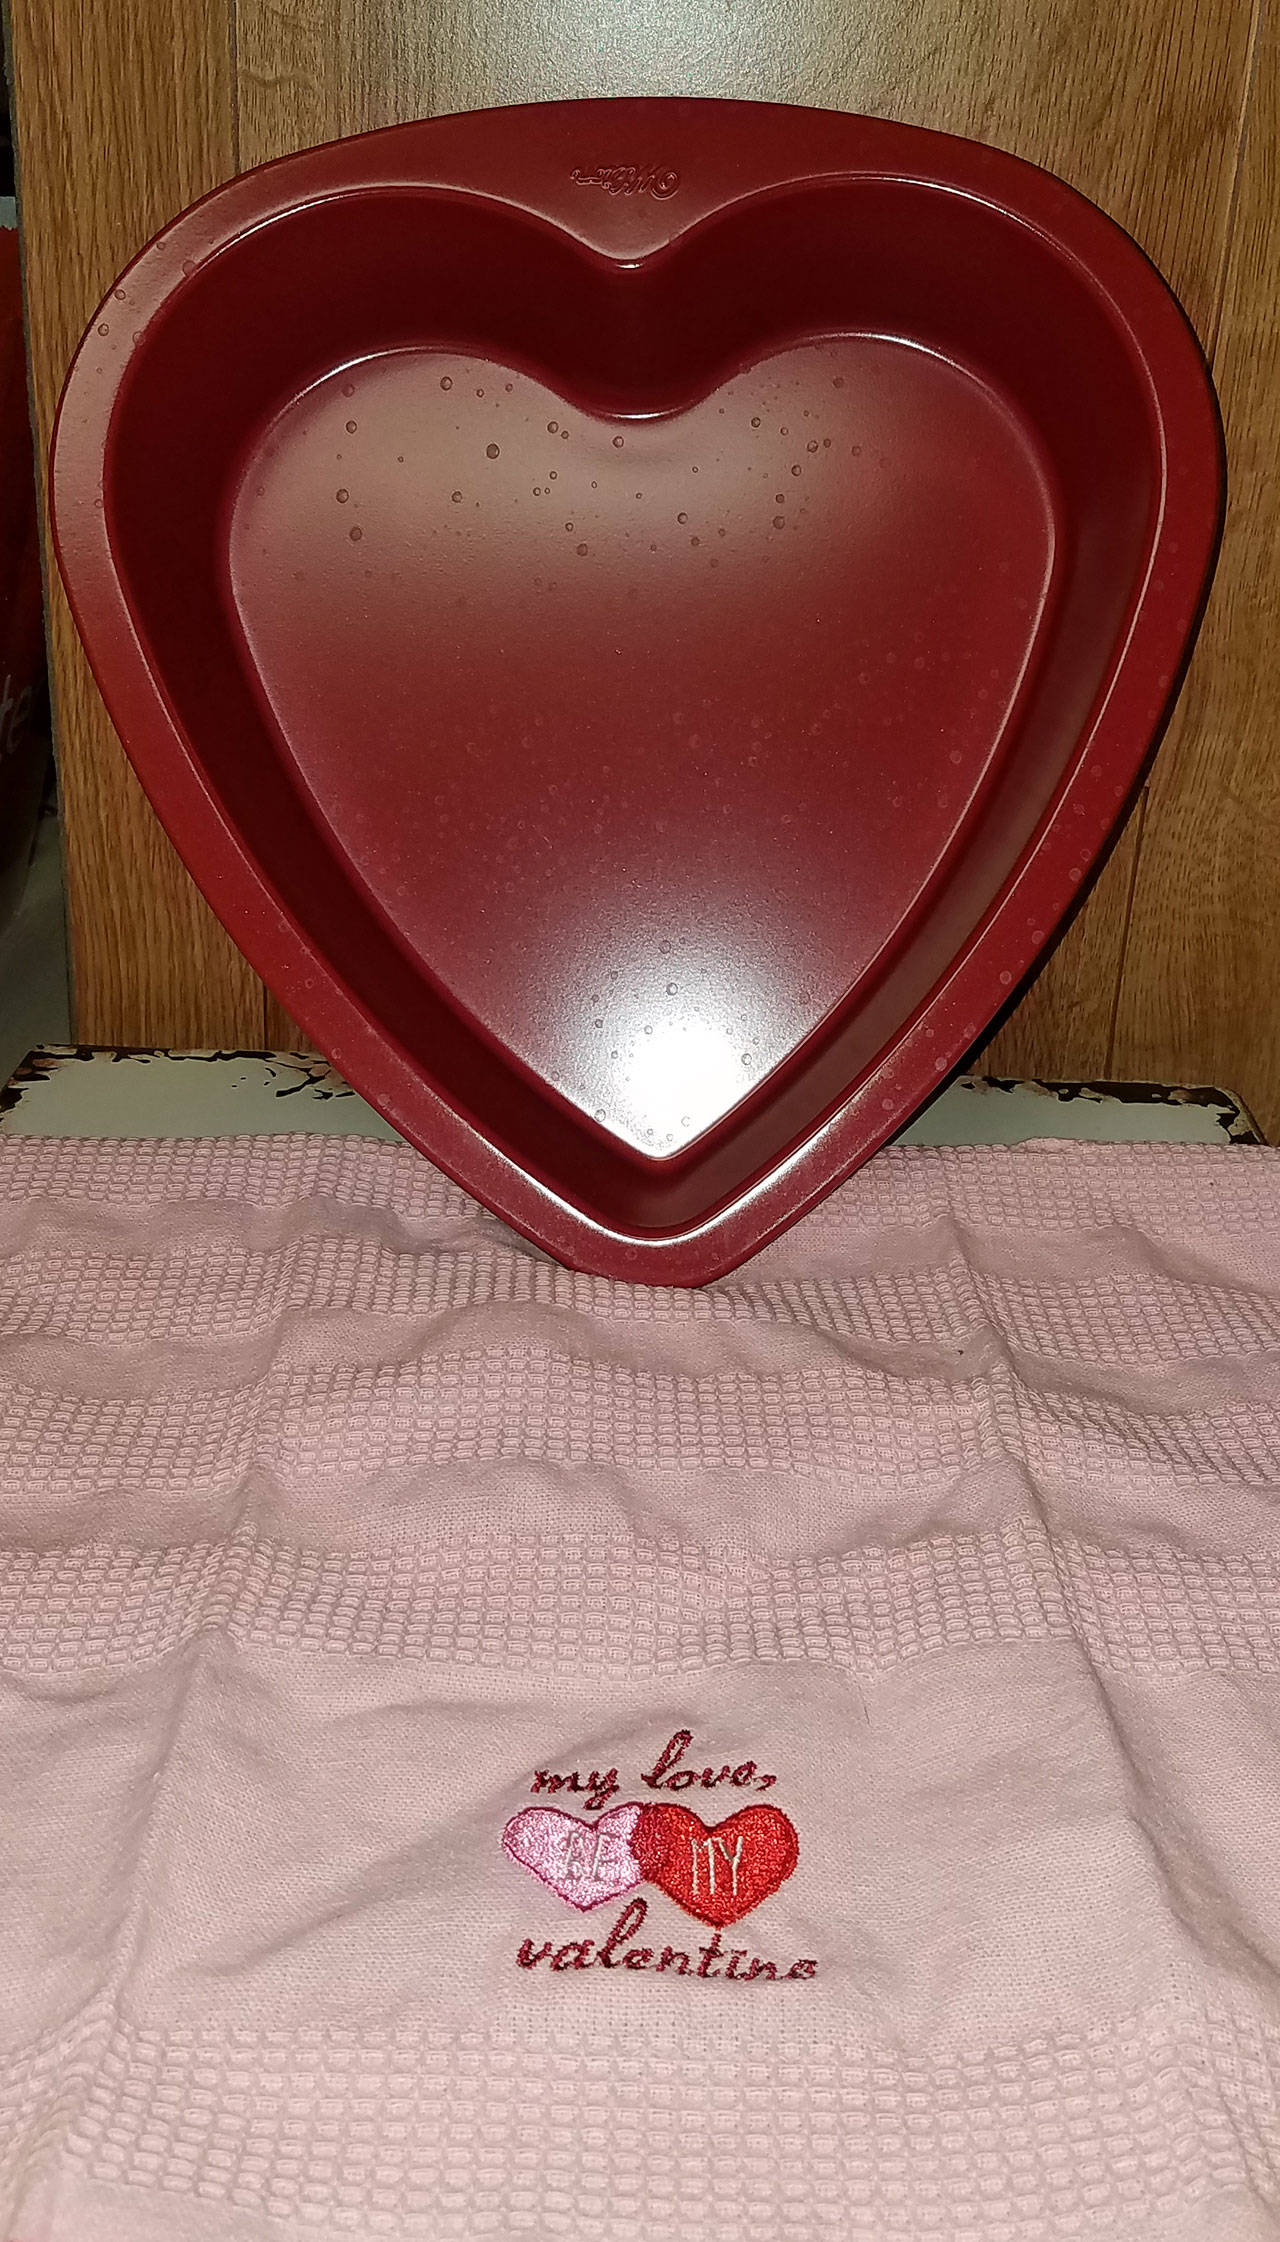 A heart-shaped mold can be used to shape Valentine’s Day meat loaf. (Emily Hanson/for Peninsula Daily News)